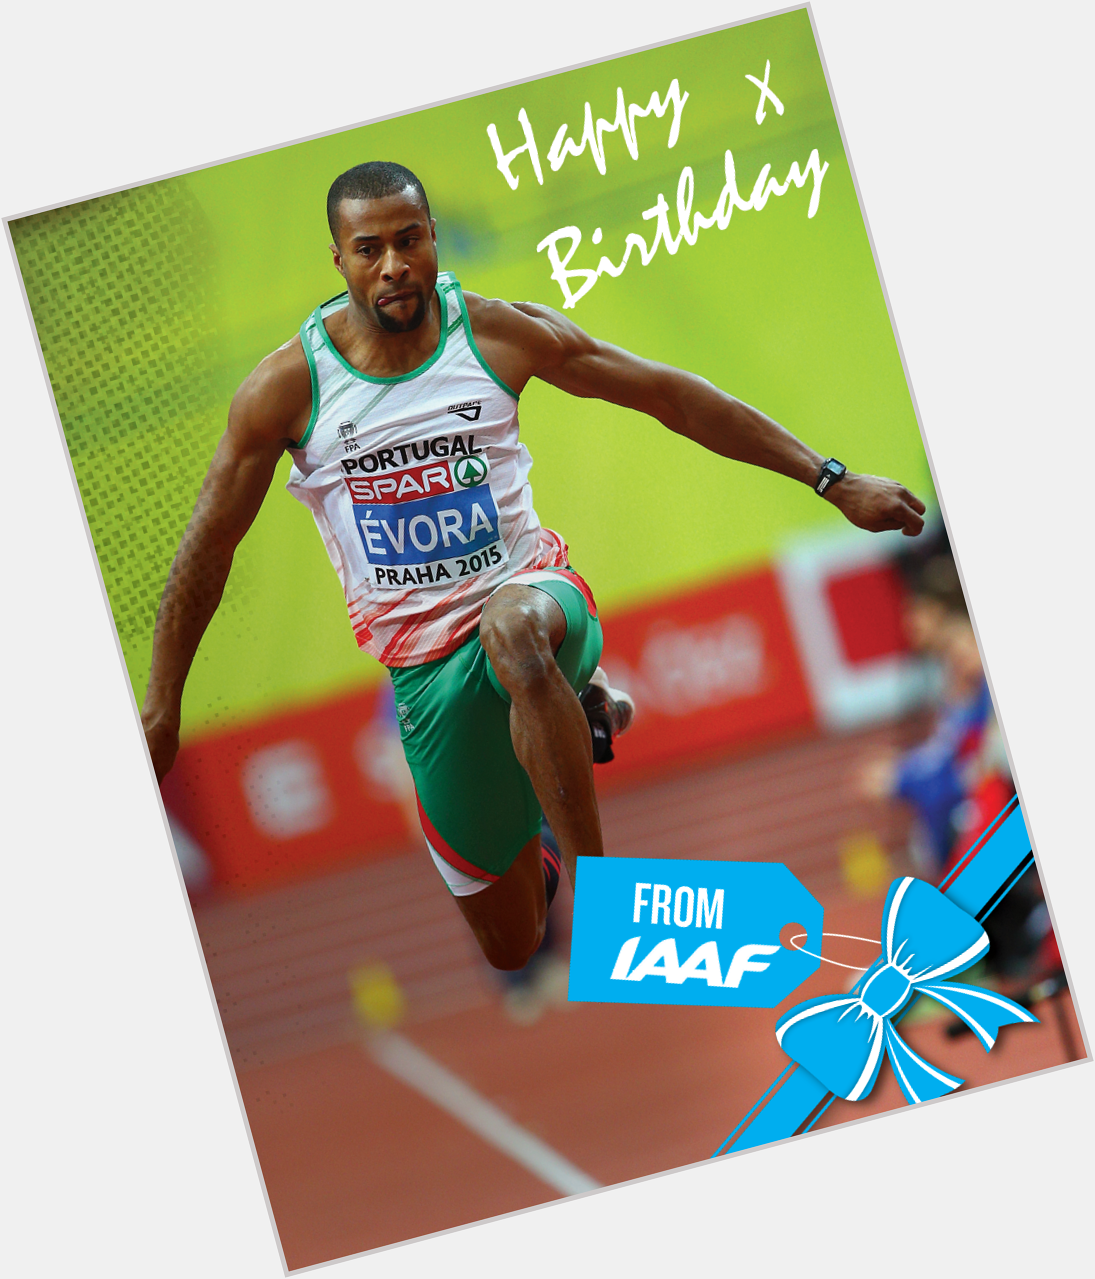 Happy birthday to \07 world and \08 Olympic triple jump champion and \15 European indoor gold medallist Nelson Evora! 